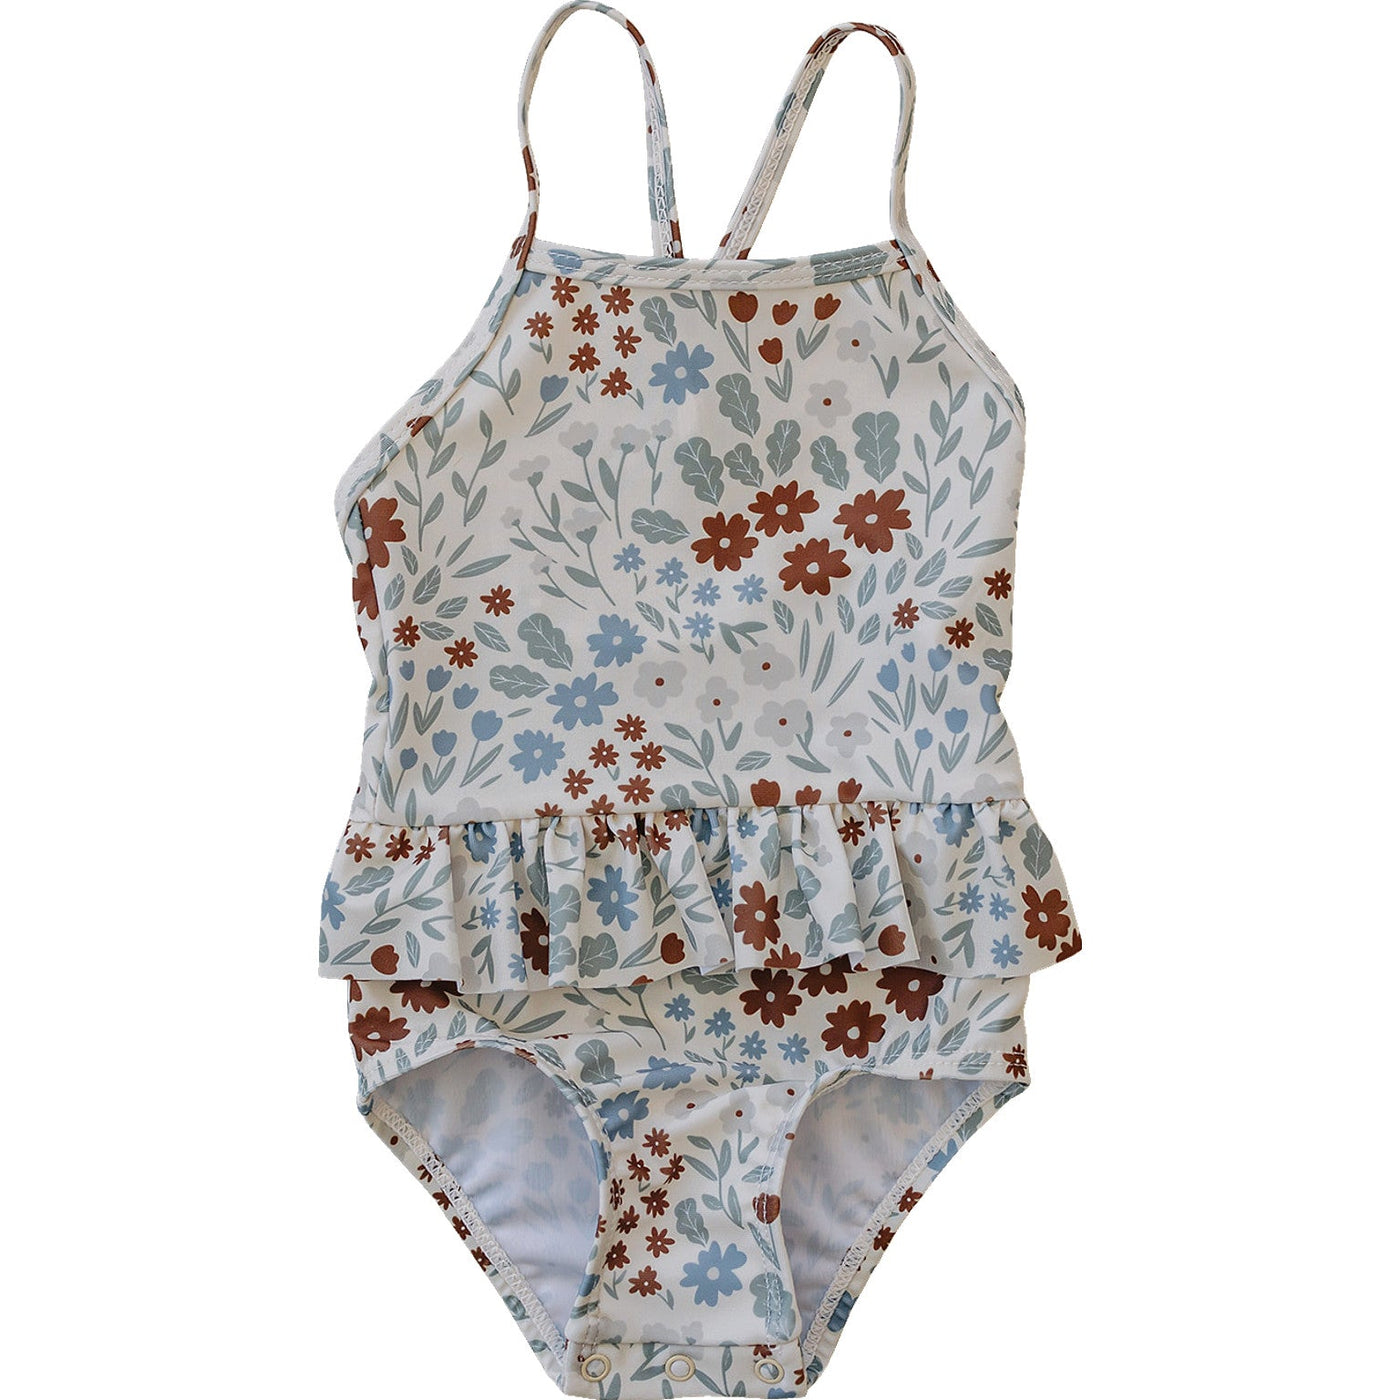 a white and blue swimsuit with a floral pattern